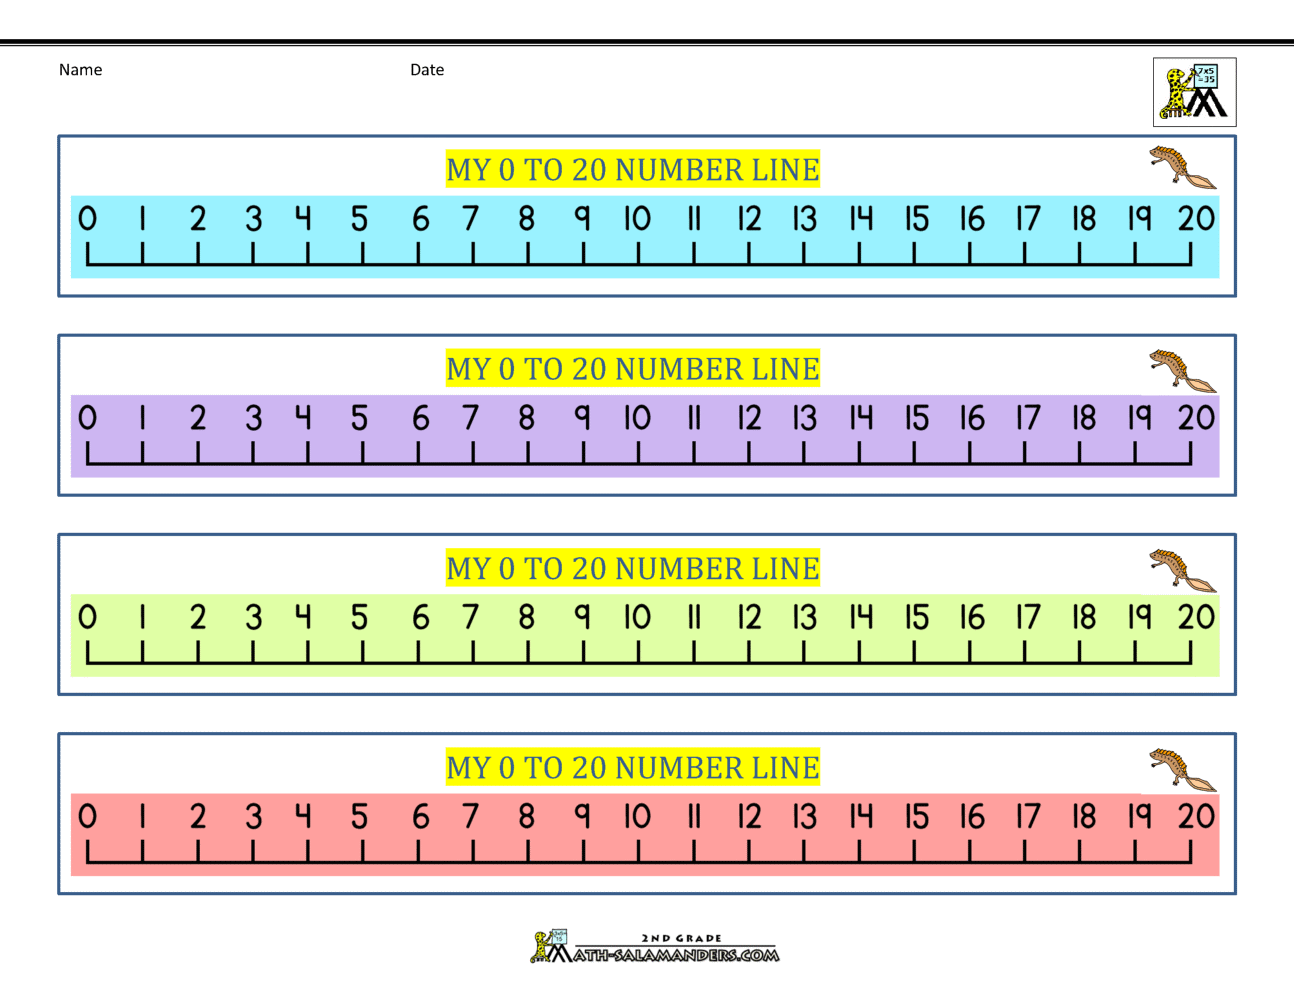 1 to 20 number line